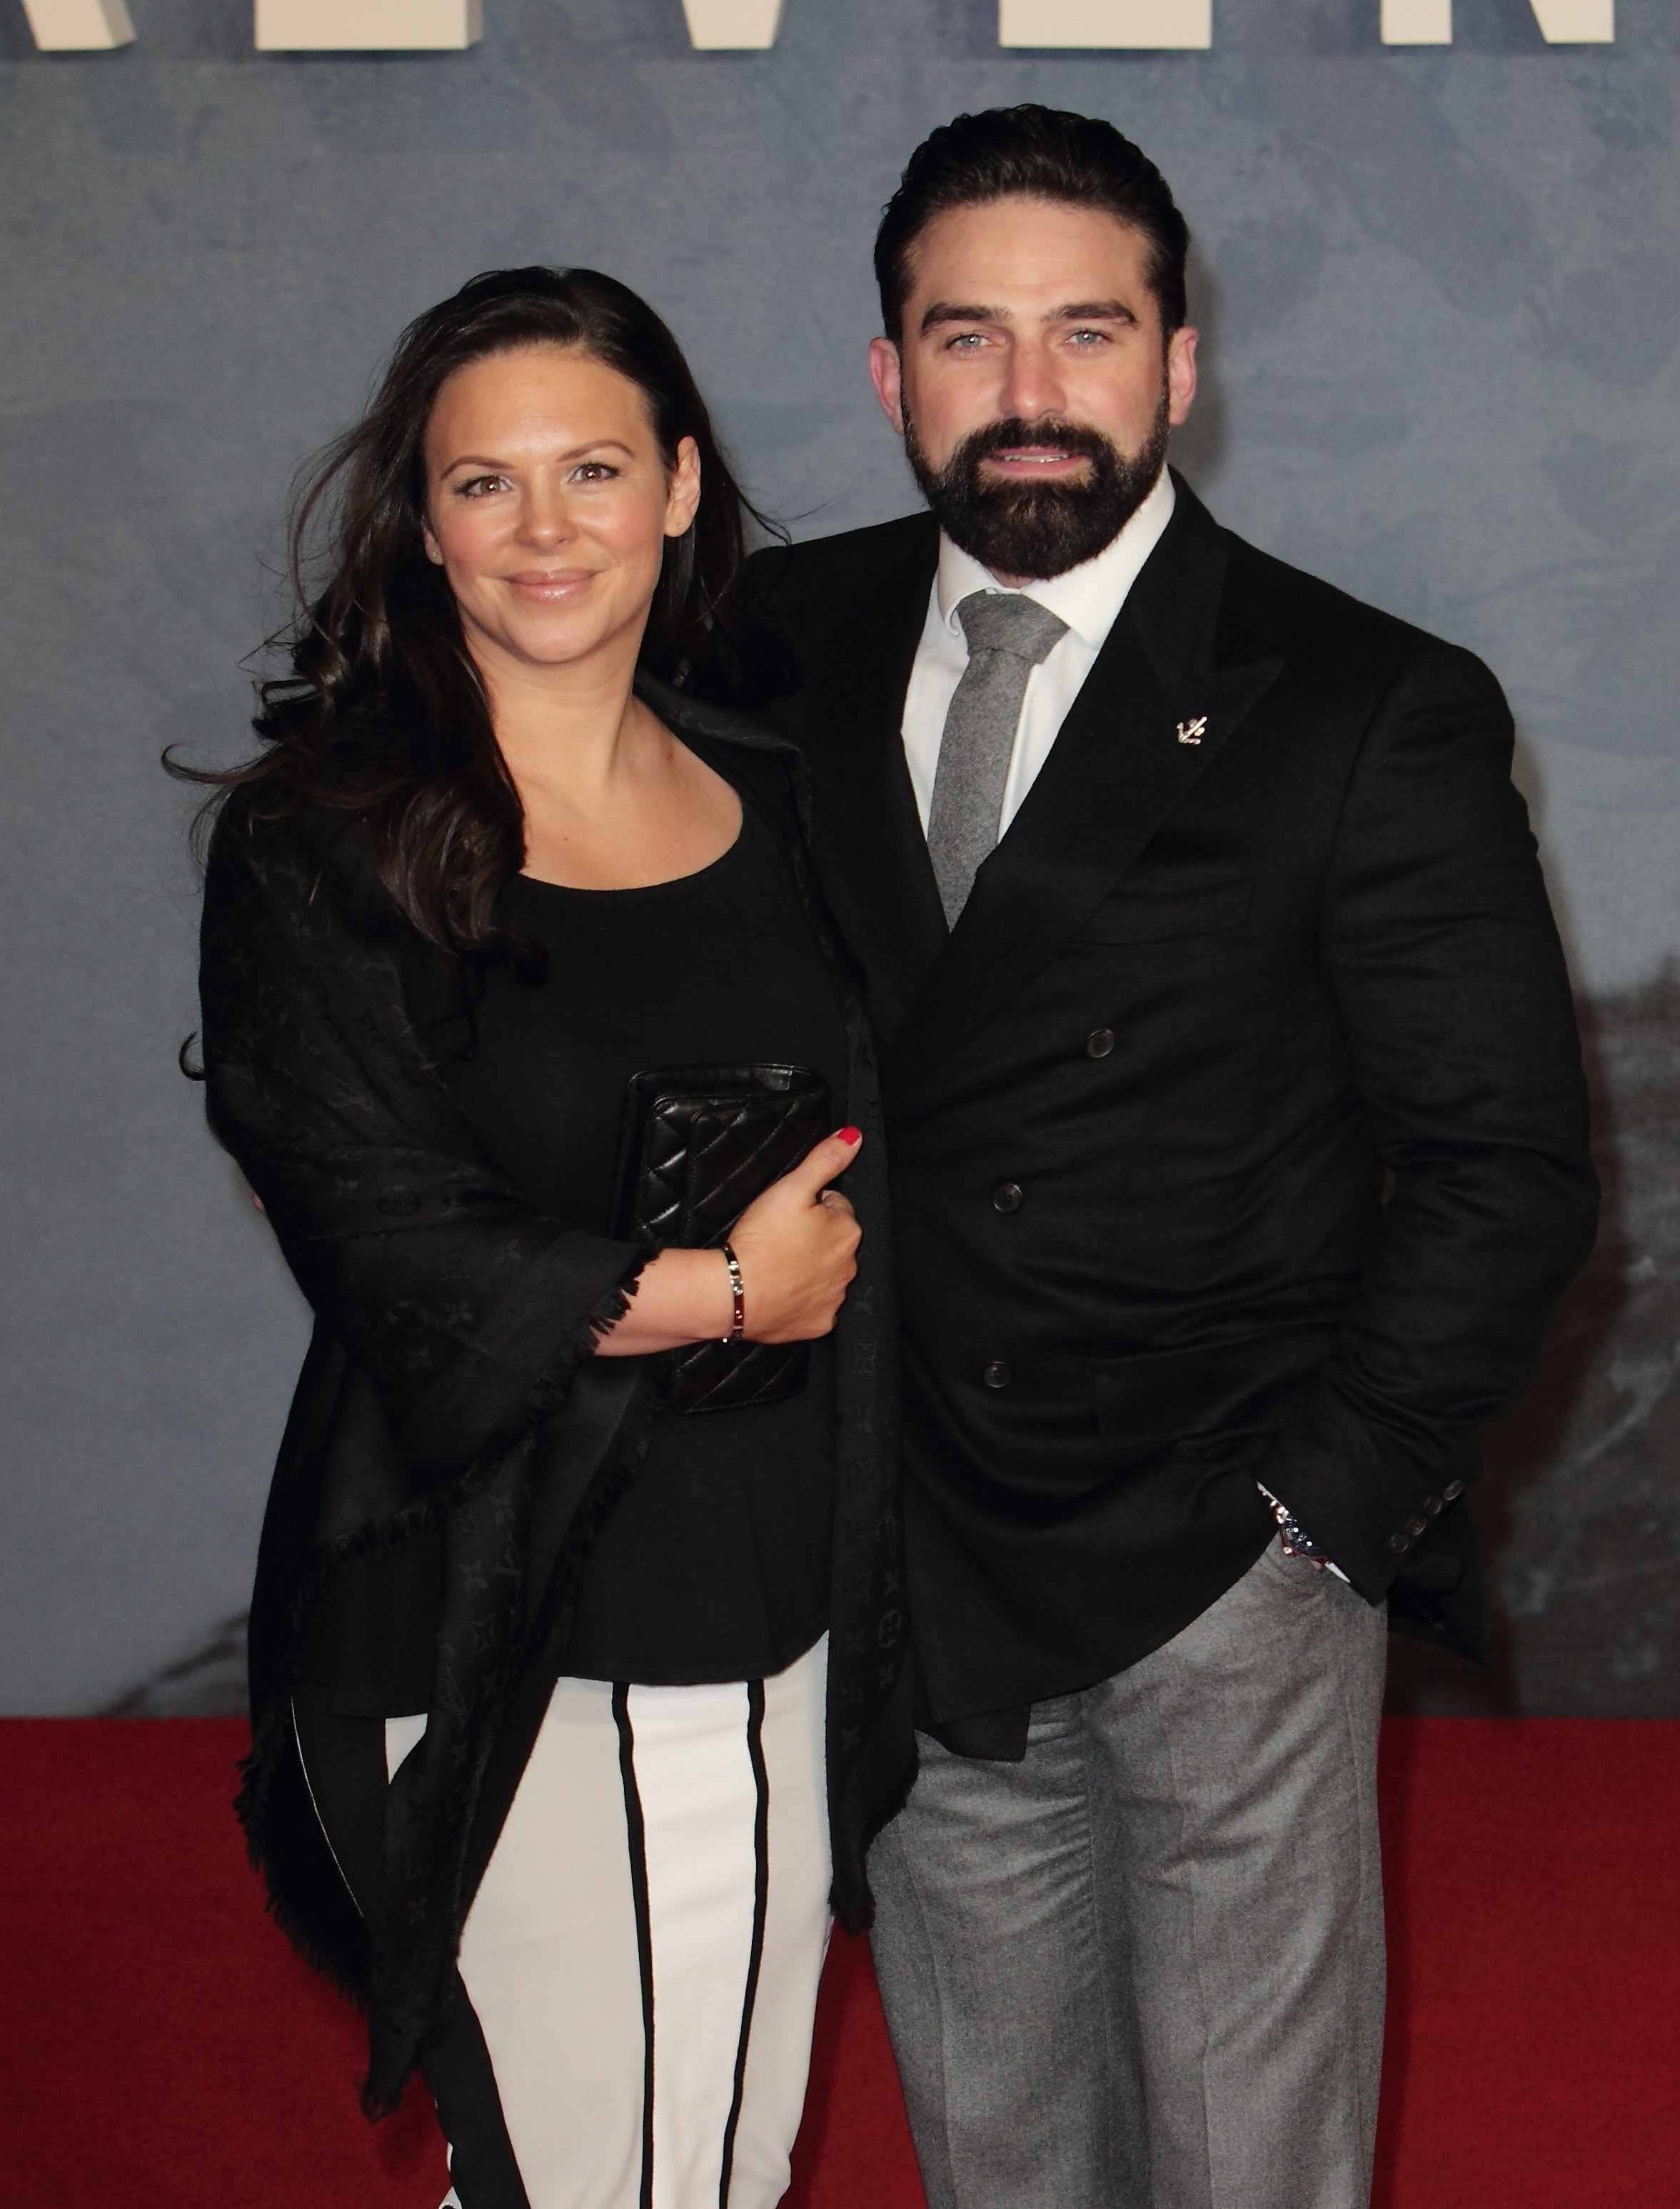 Ant Middleton and wife Emilie on the red carpet